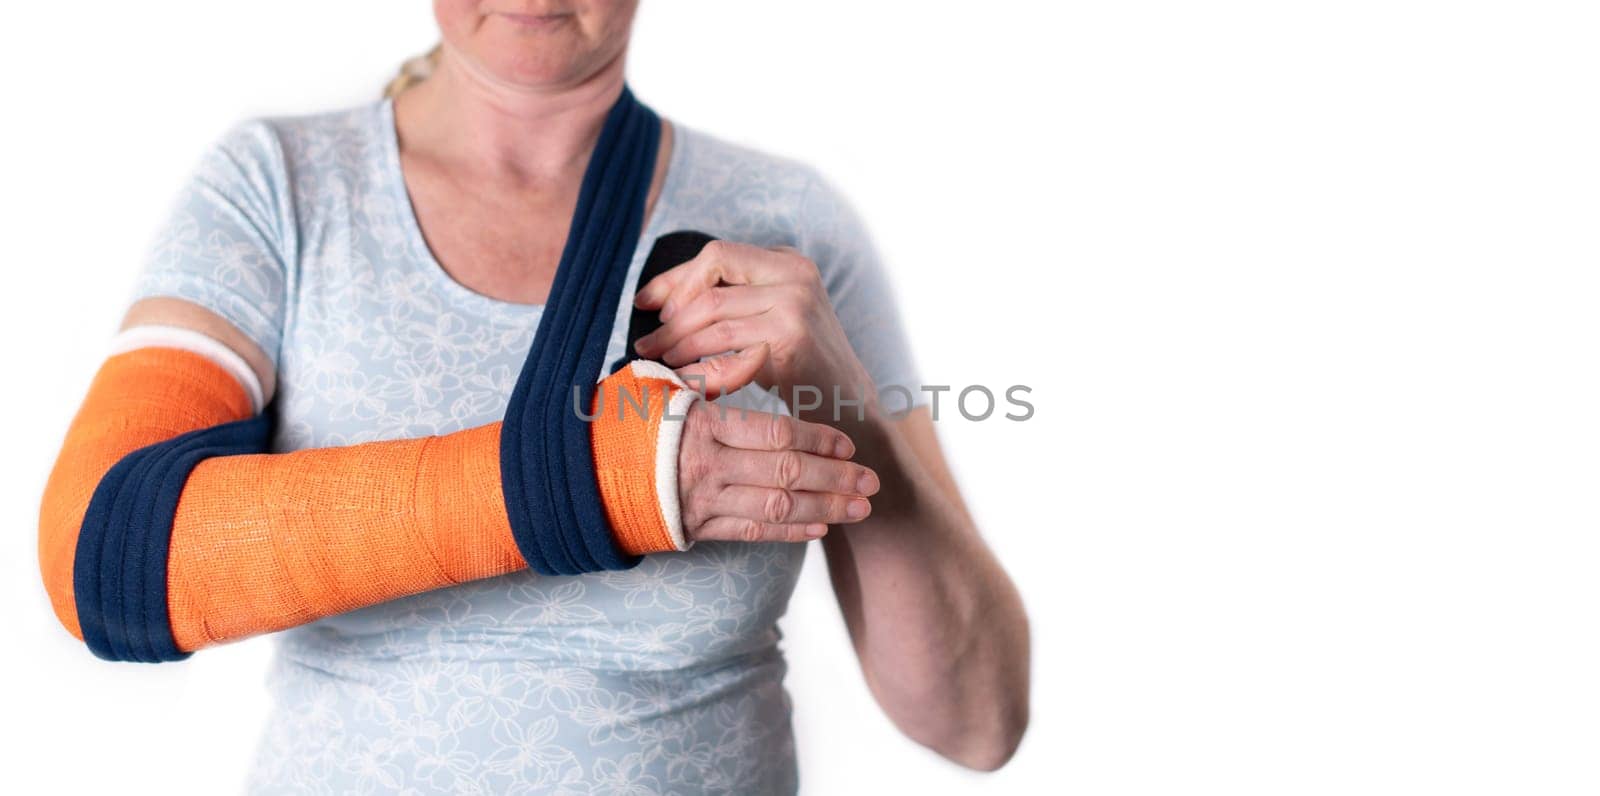 middle aged woman with broken arm in cast hangs her arm in a sling, modern treatment methods, on a neutral background by KaterinaDalemans